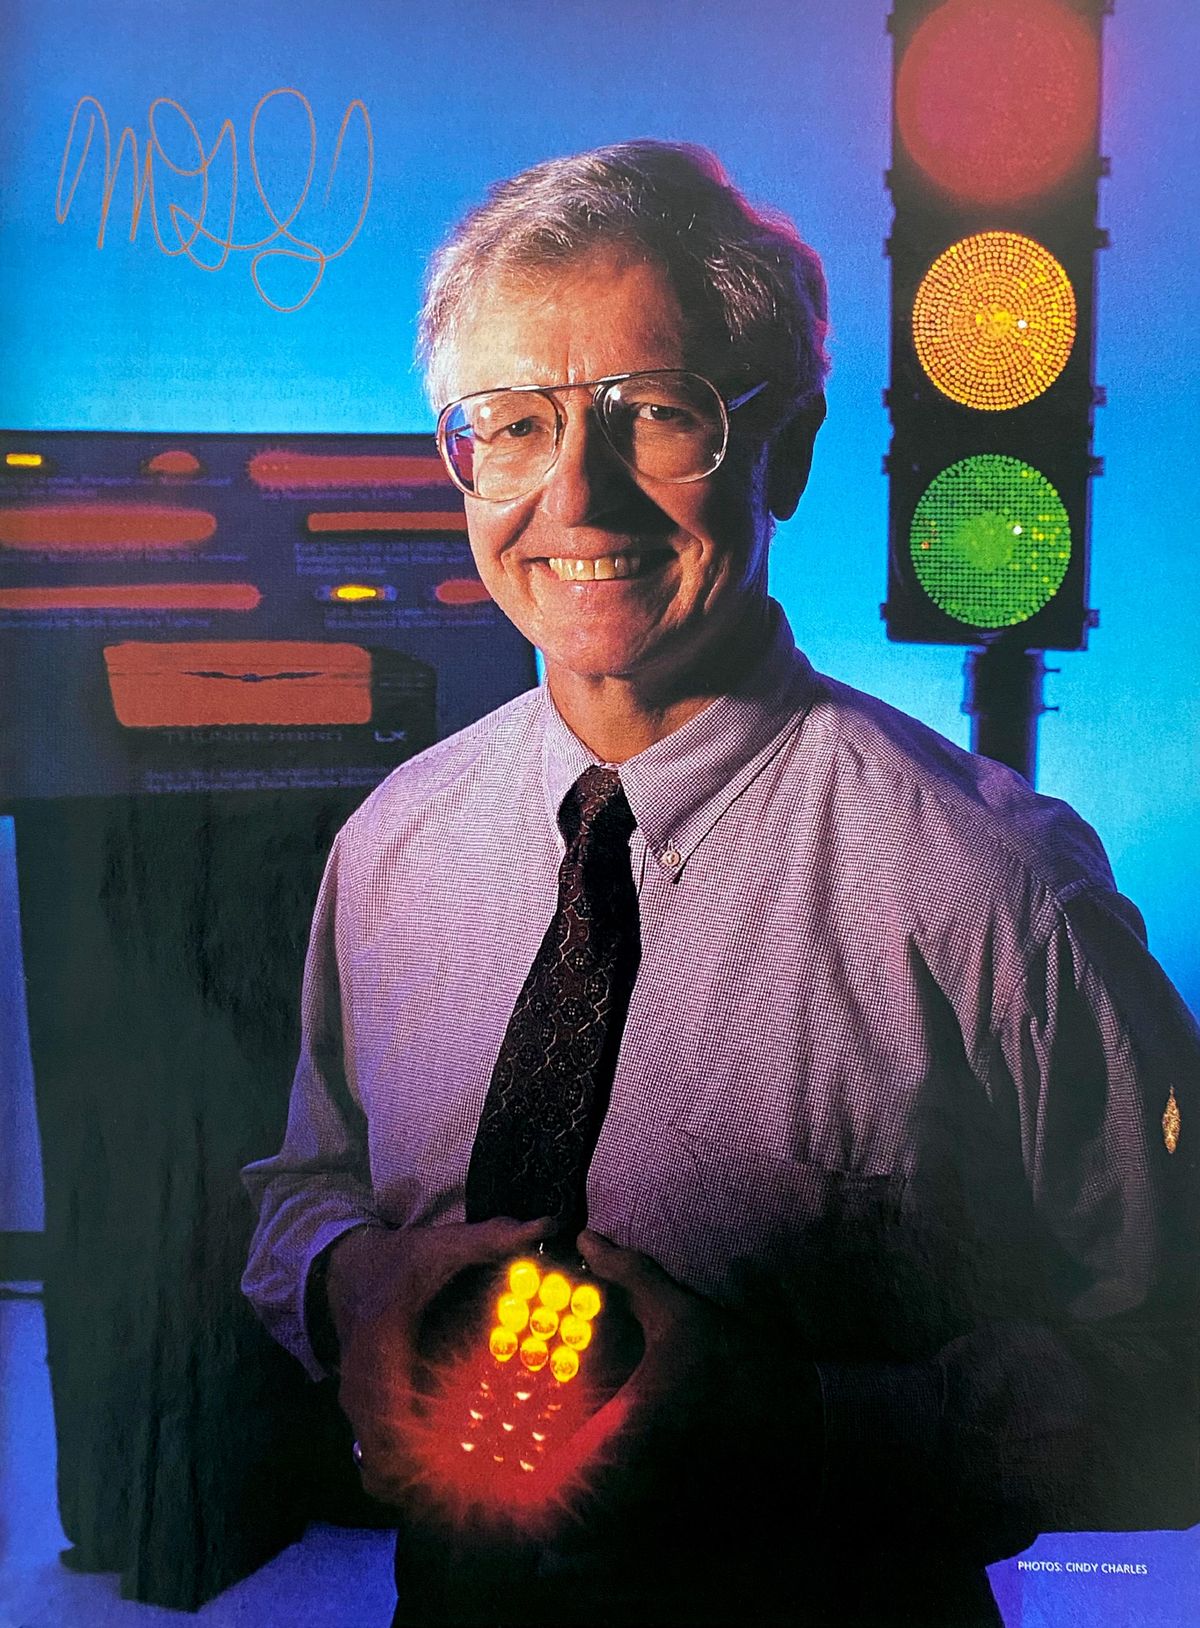 Man  with grey hair wearing dress shirt and tie standing in front of an LED stoplight and holding a panel with yellow and red LEDs glowing